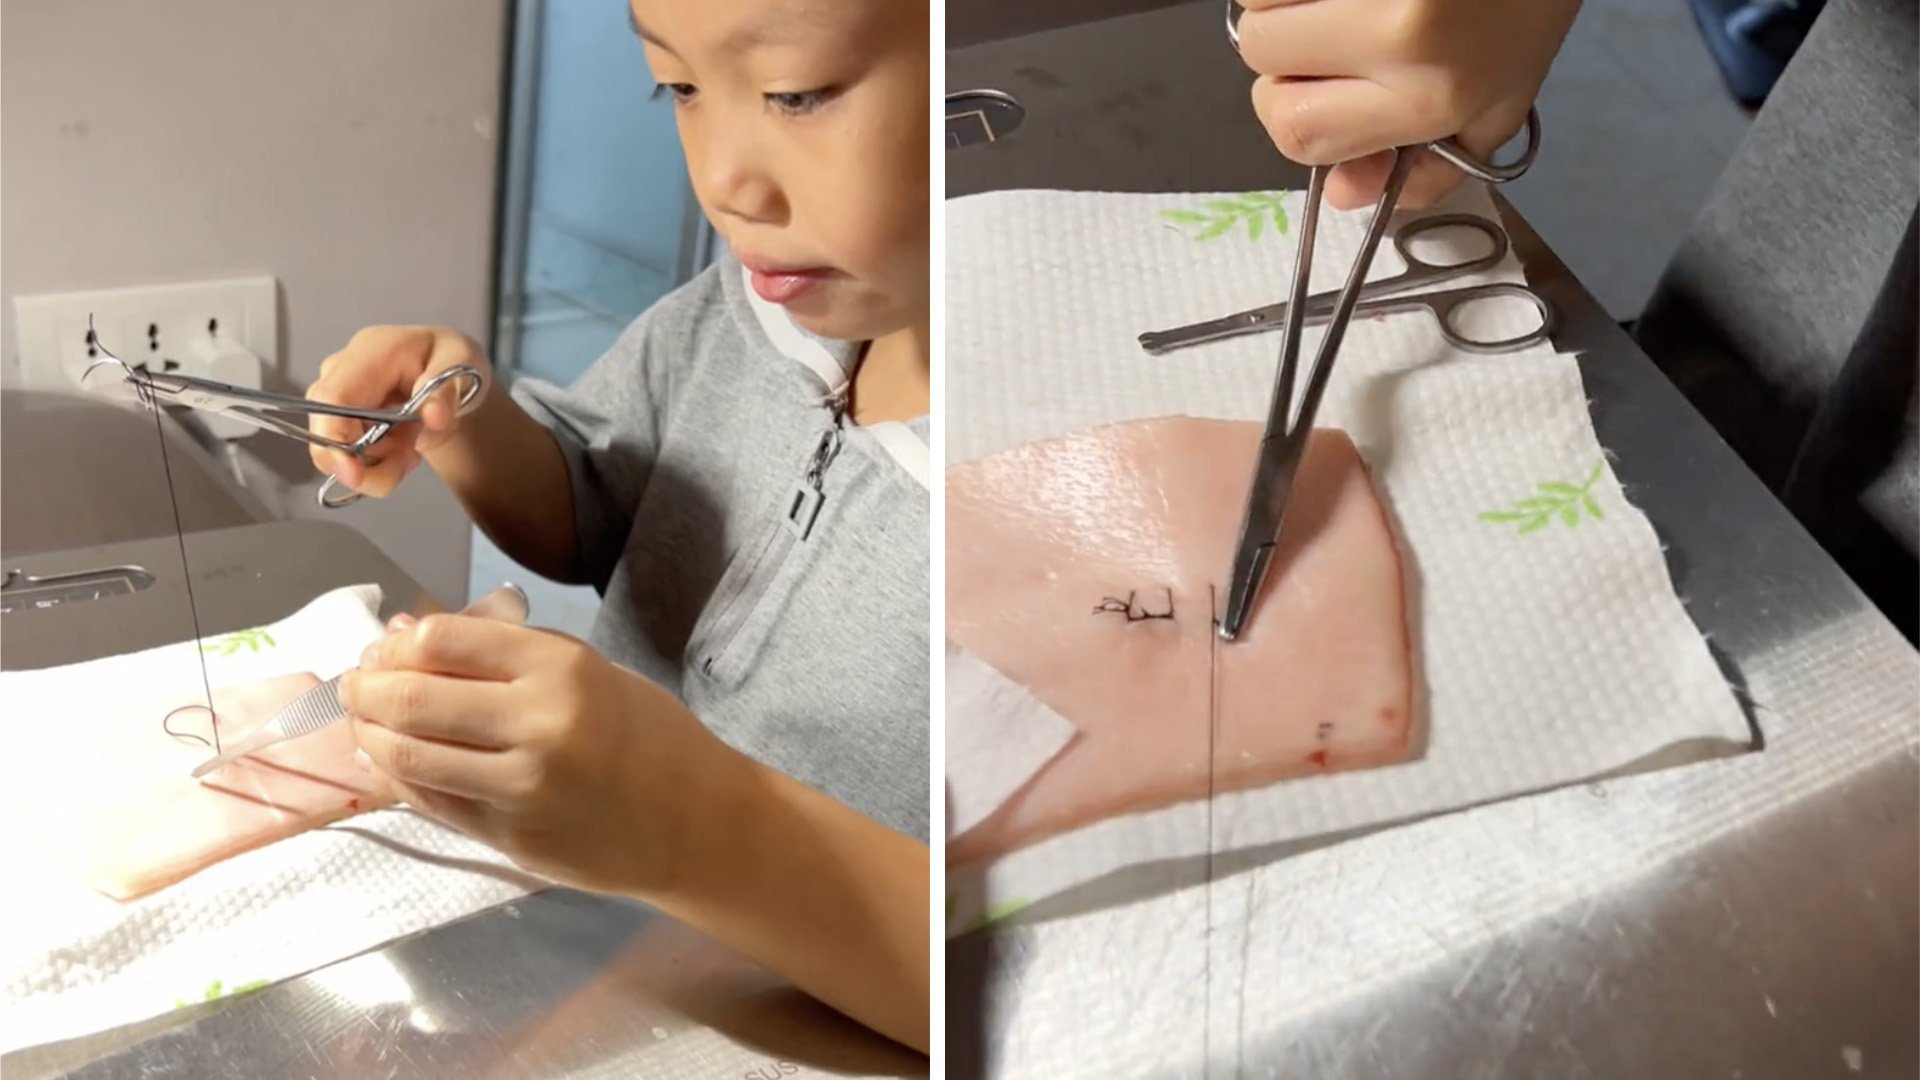 A girl in China, aged 8, stuns social media in a video showing her demonstrating suturing techniques taught by her father who is a doctor. Photo: SCMP composite